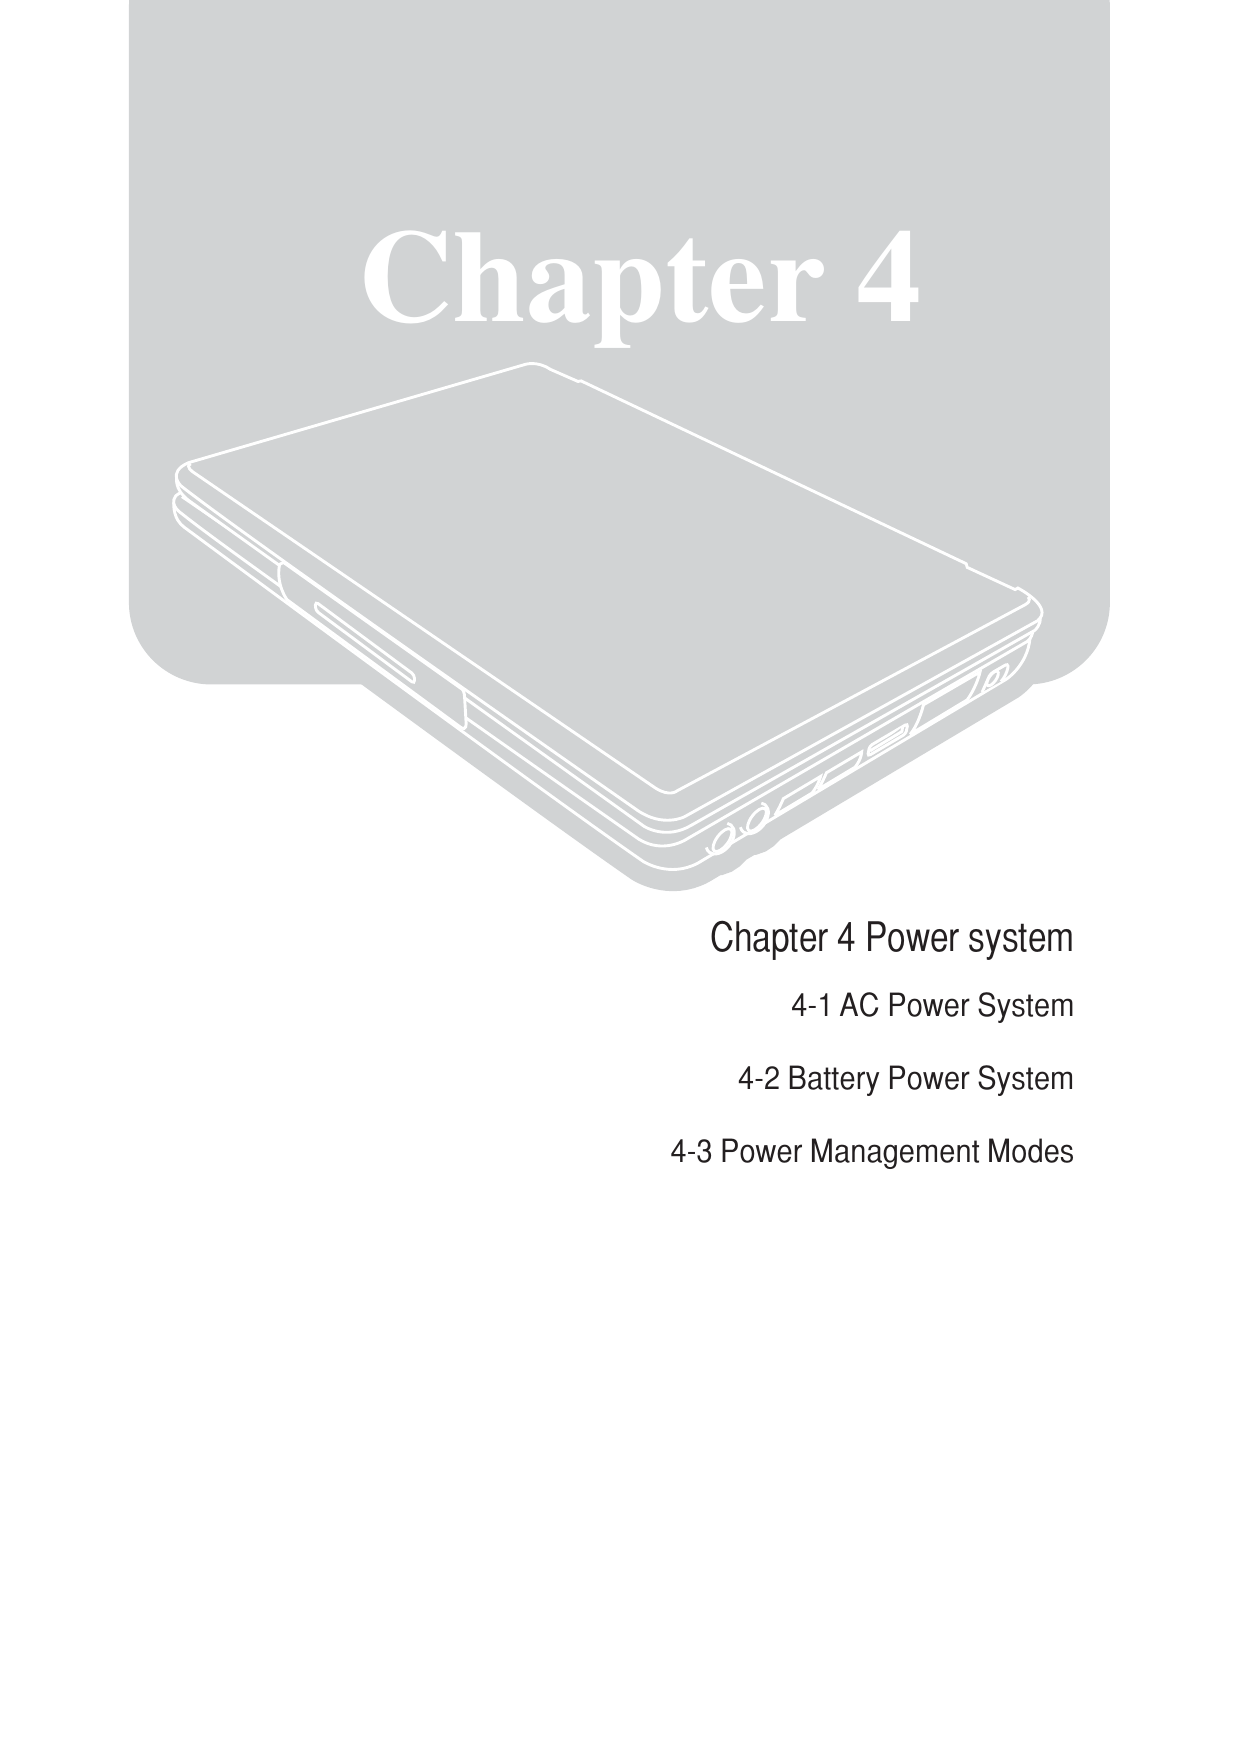 Chapter 4Chapter 4 Power system4-1 AC Power System4-2 Battery Power System4-3 Power Management Modes